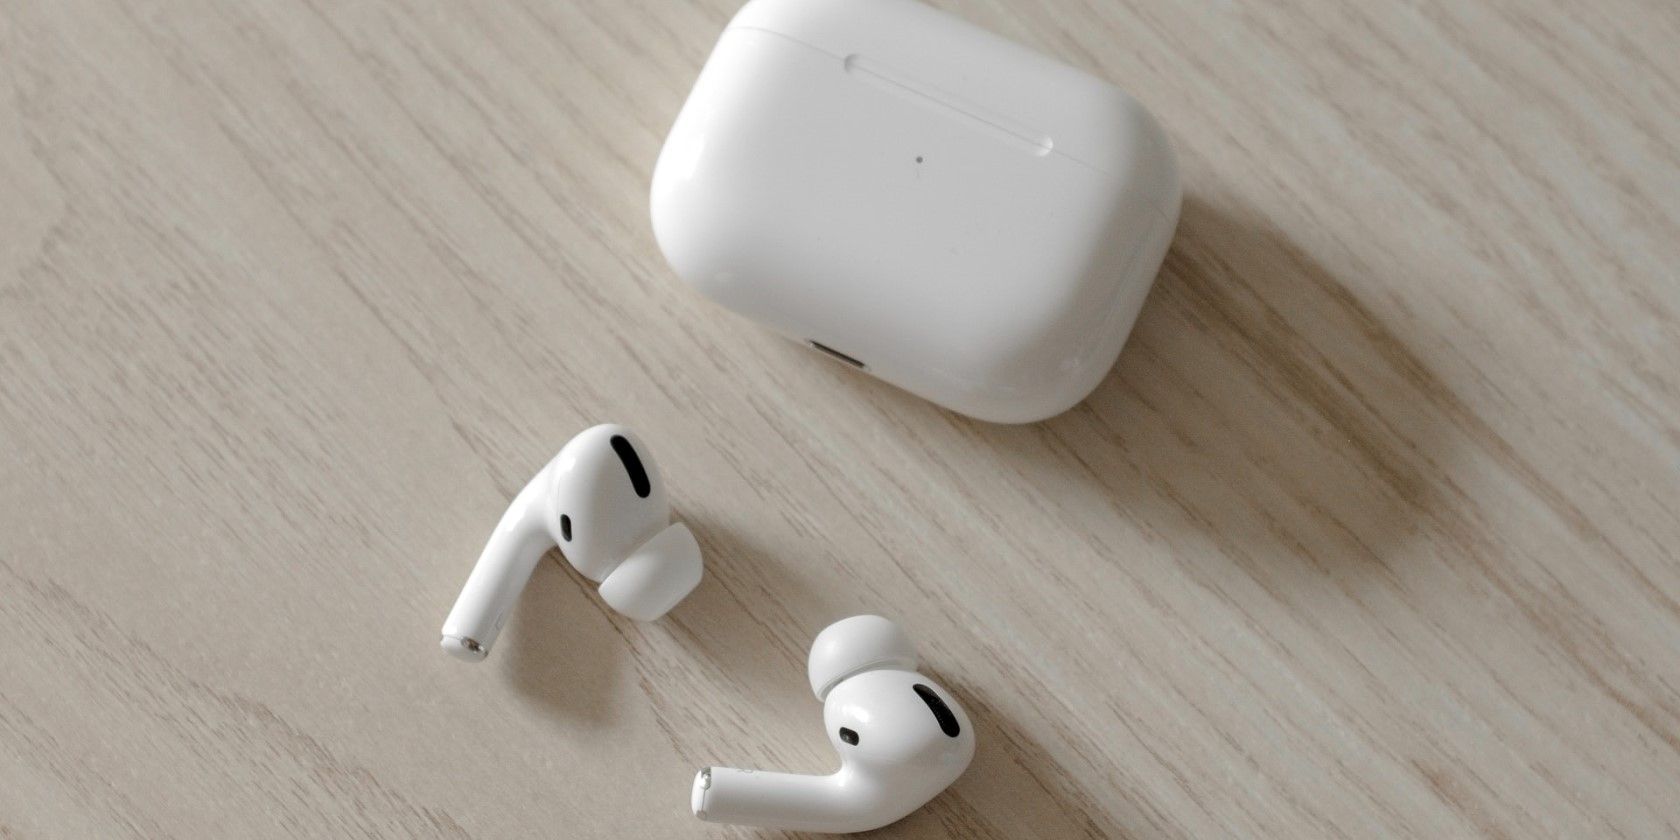 Get Apple AirPods Pro for Only 169 on Black Friday